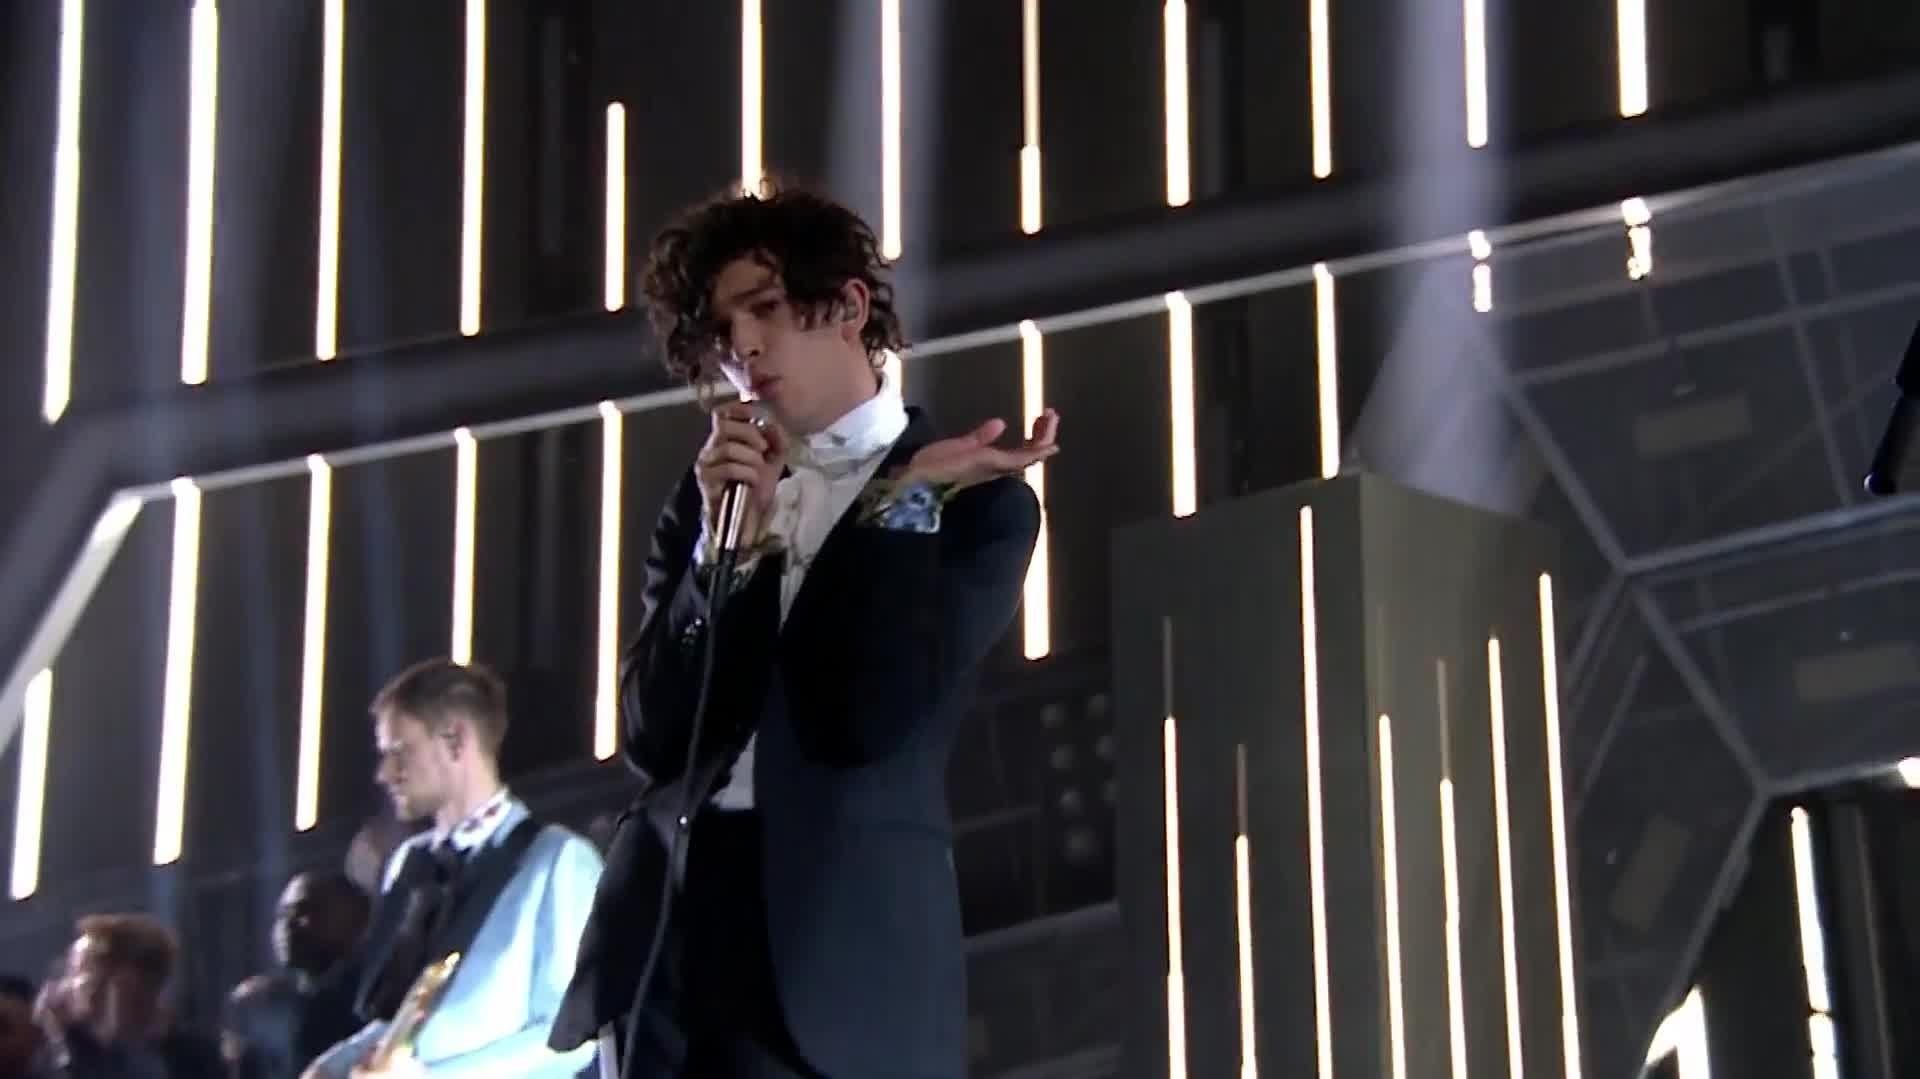 The 1975 - The Sound (Live on BRIT Awards 2017)